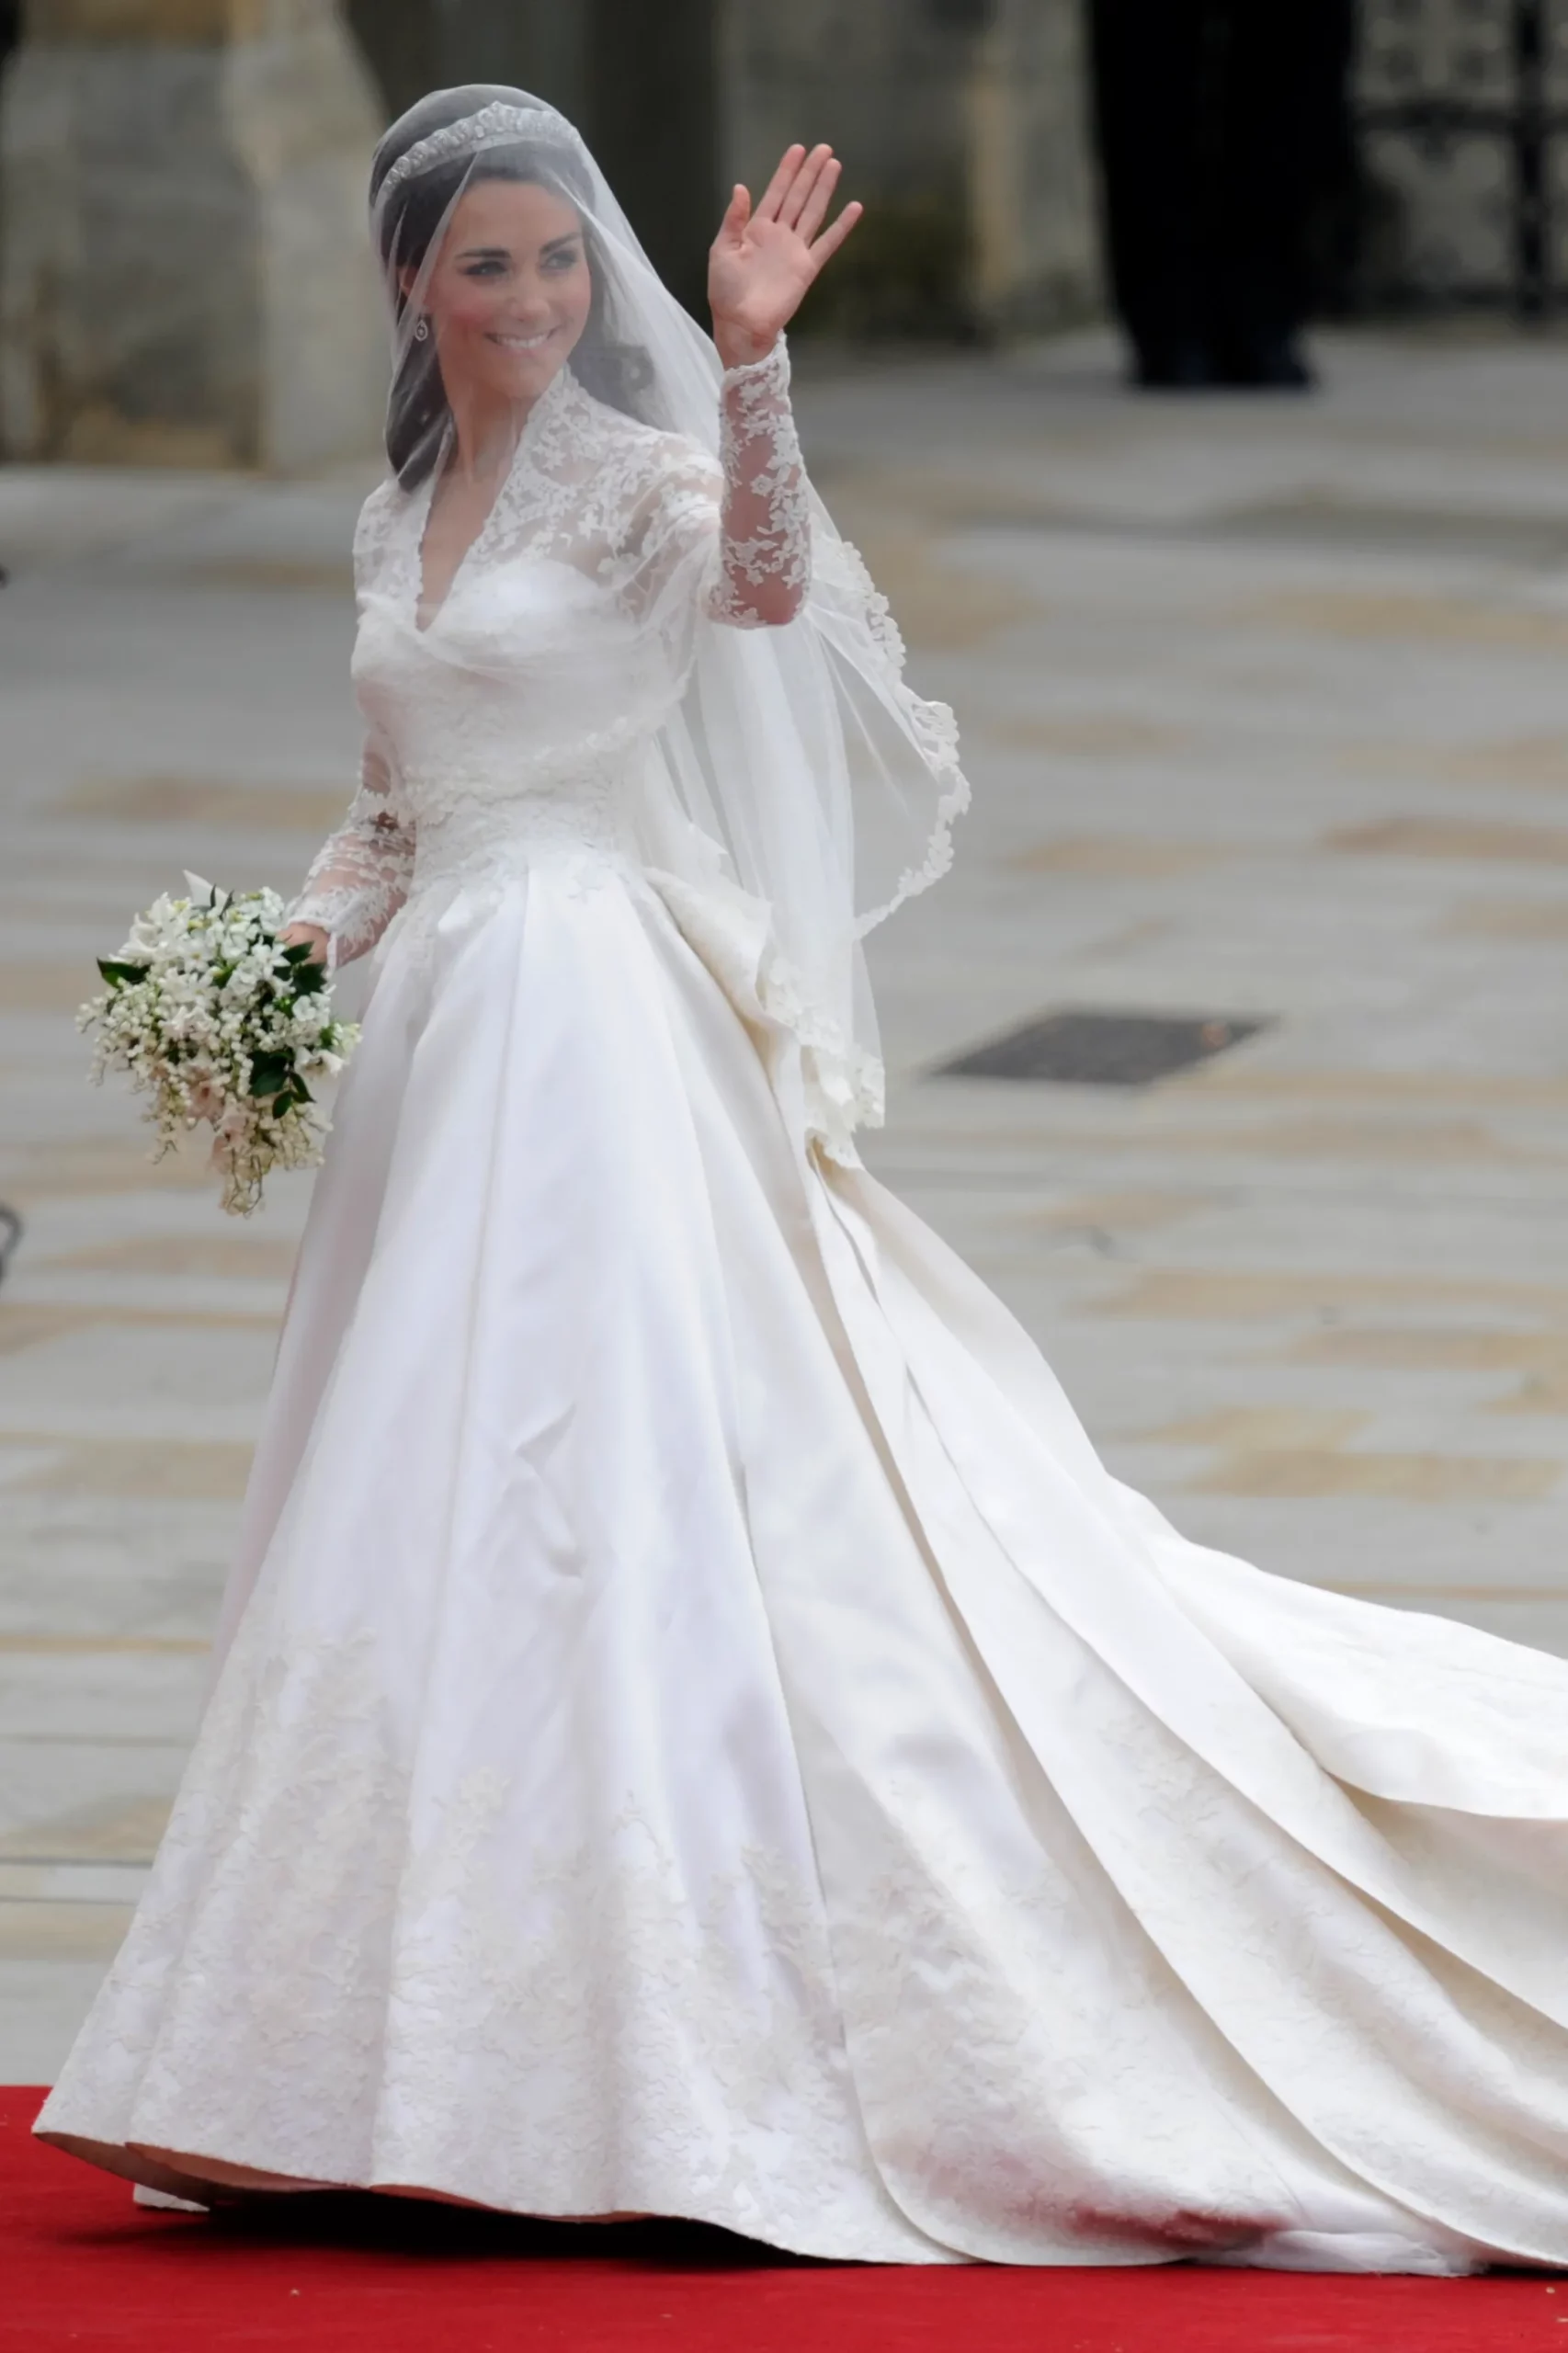 Kate Middleton In Modest Lace Wedding Dress